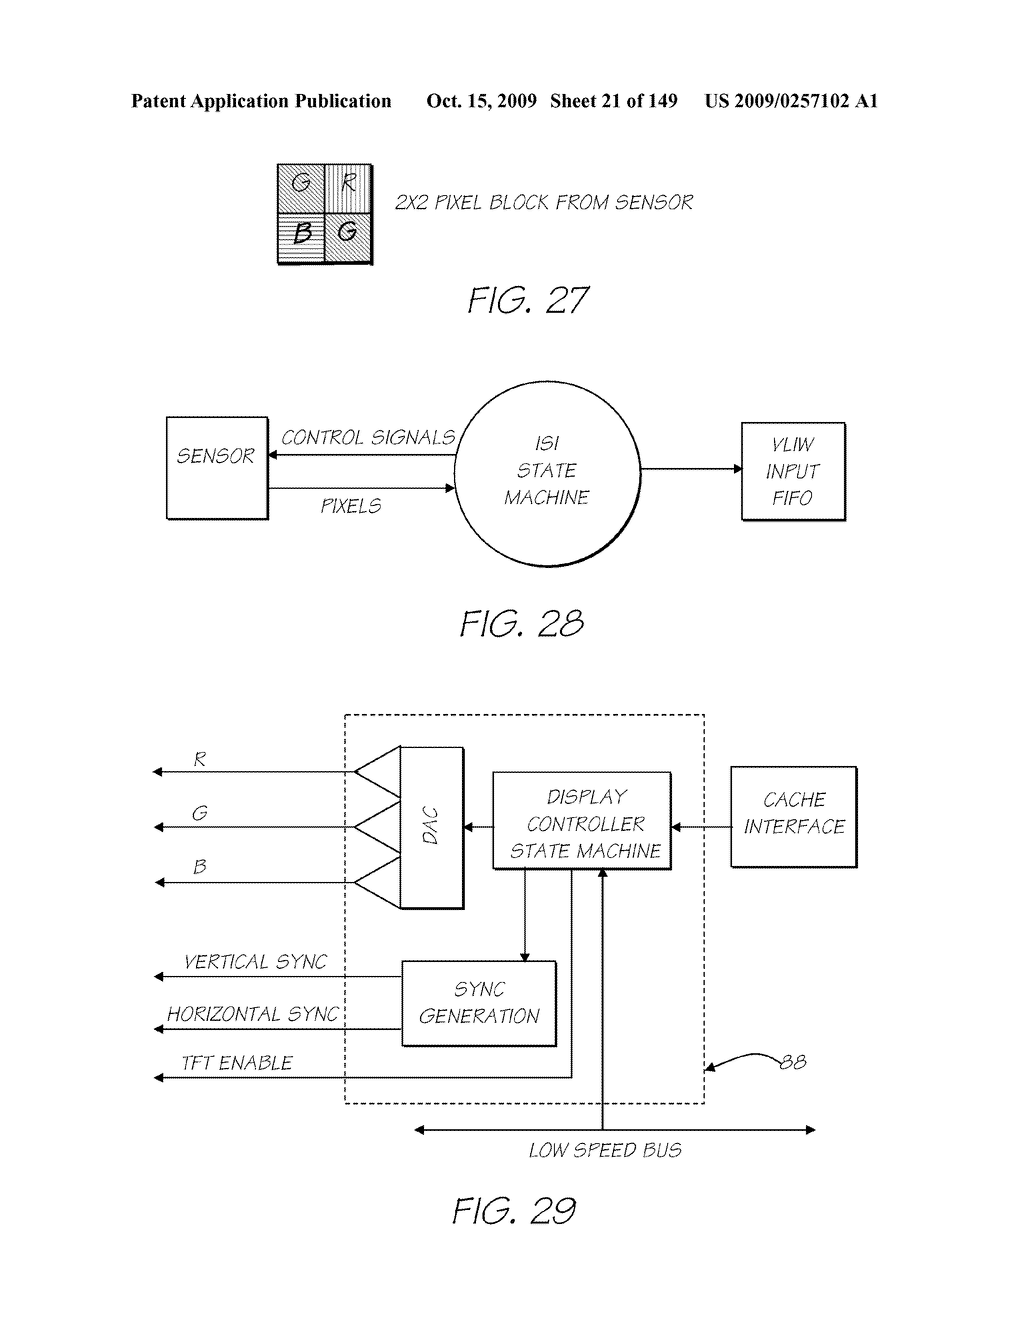 IMAGE PROCESSING APPARATUS HAVING CARD READER FOR APPLYING EFFECTS STORED ON A CARD TO A STORED IMAGE - diagram, schematic, and image 22